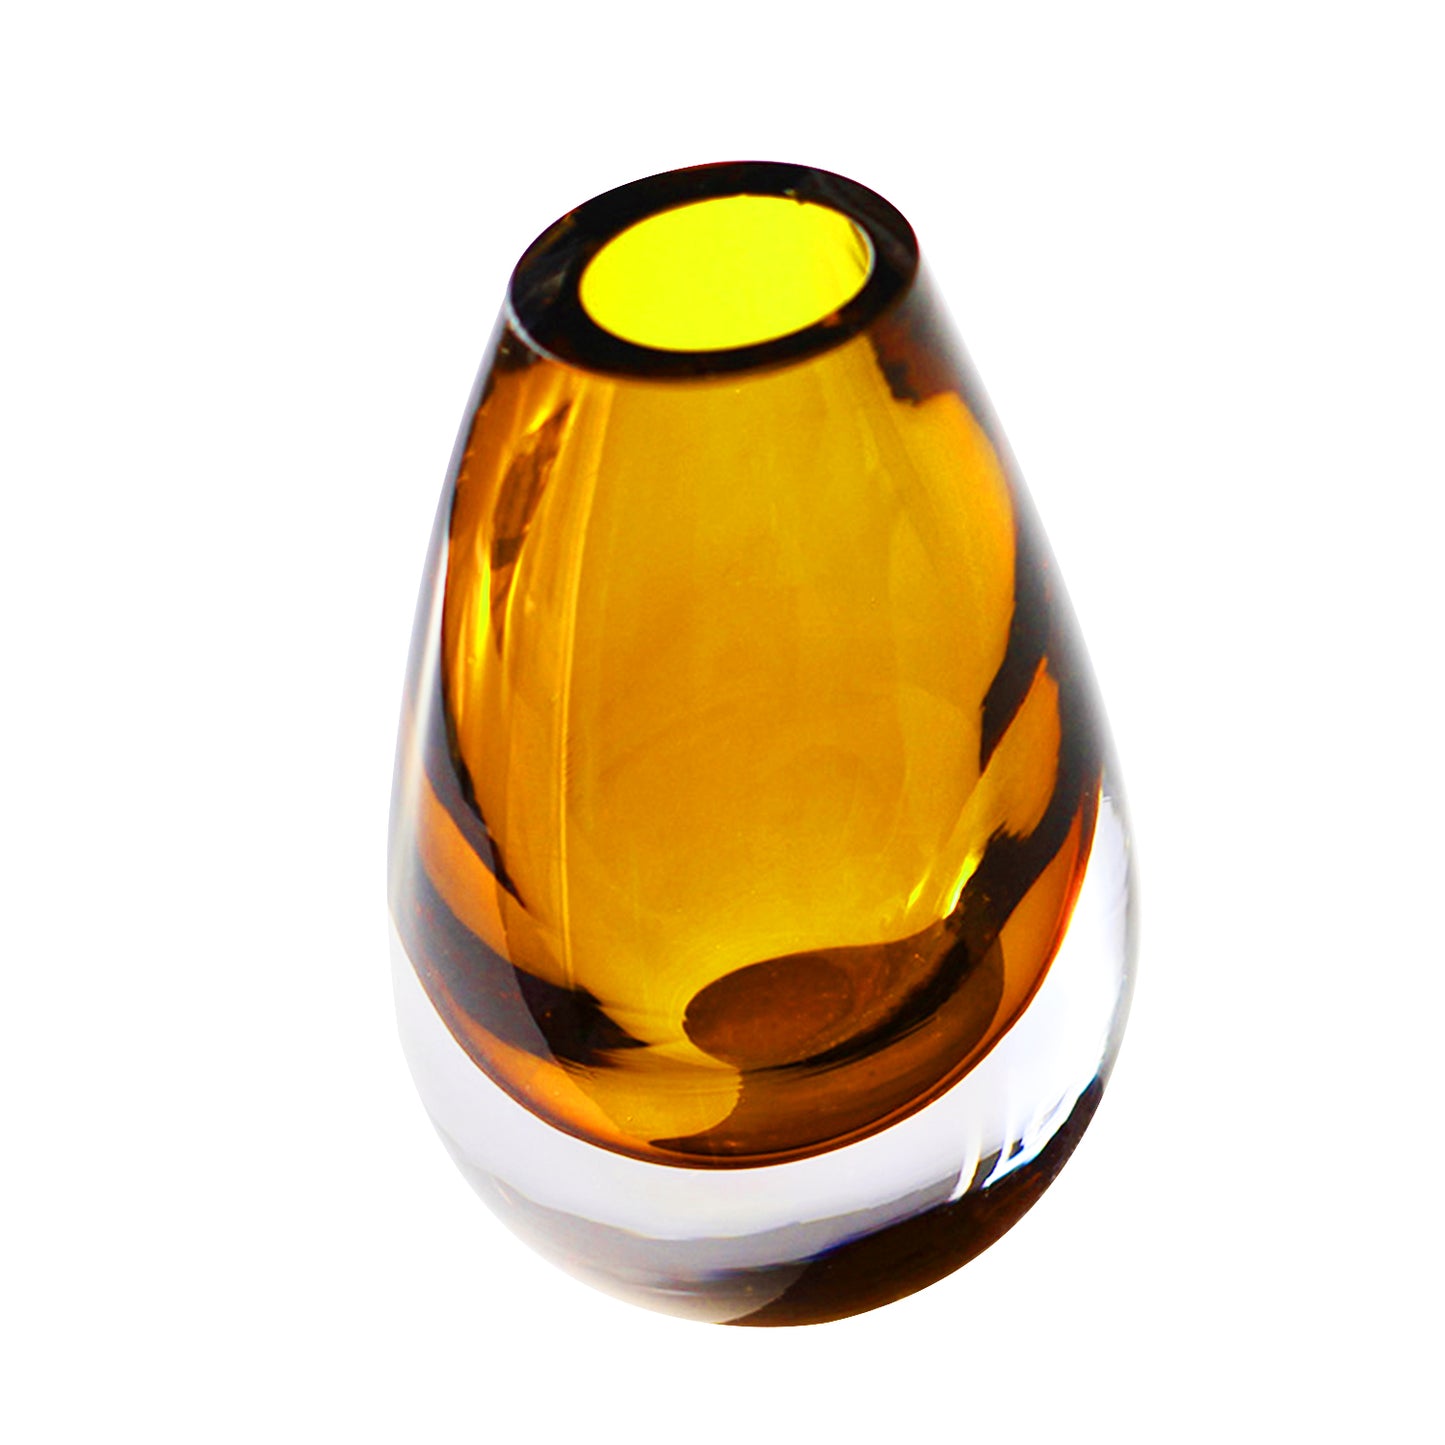 Drop Amber Yellow Vase - Hand-Blown Thick Glass - Eco-Friendly Elegance